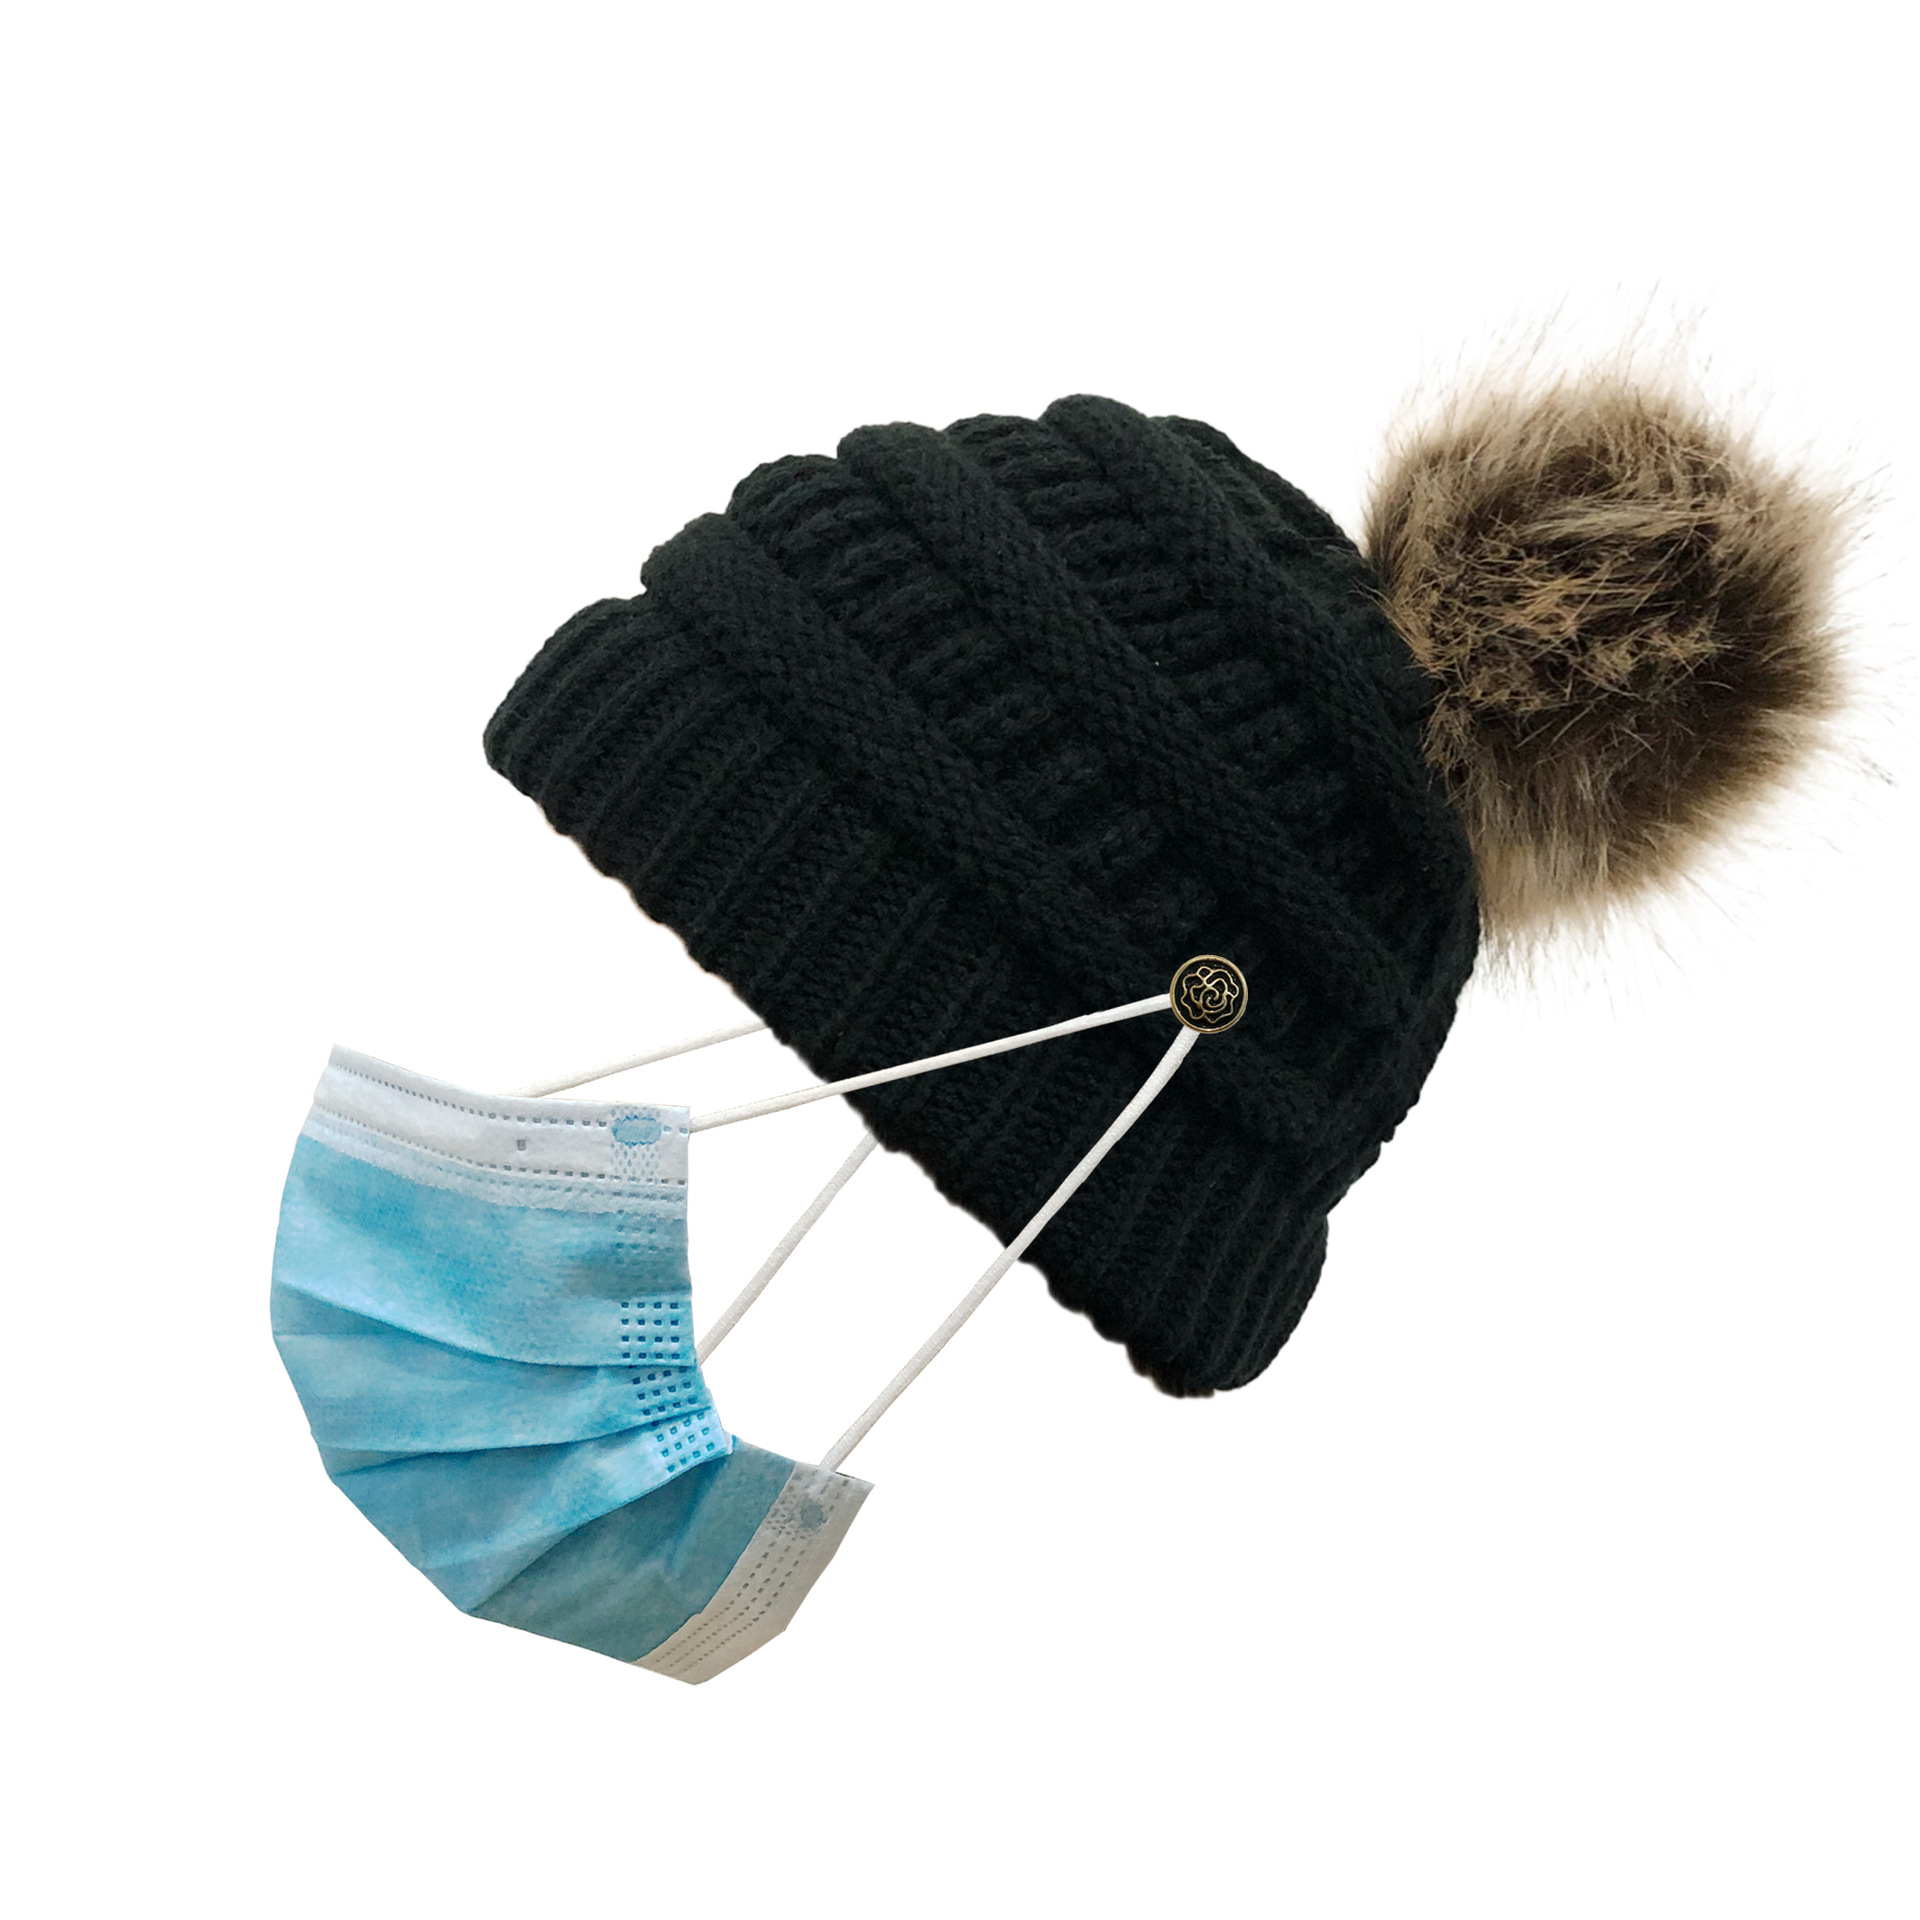 Crochet Ponytail Hat With Fur Pom Pom Mask Button Hat Hot Selling Knitted Hat Wool Ball Wool Hat Criss-cross